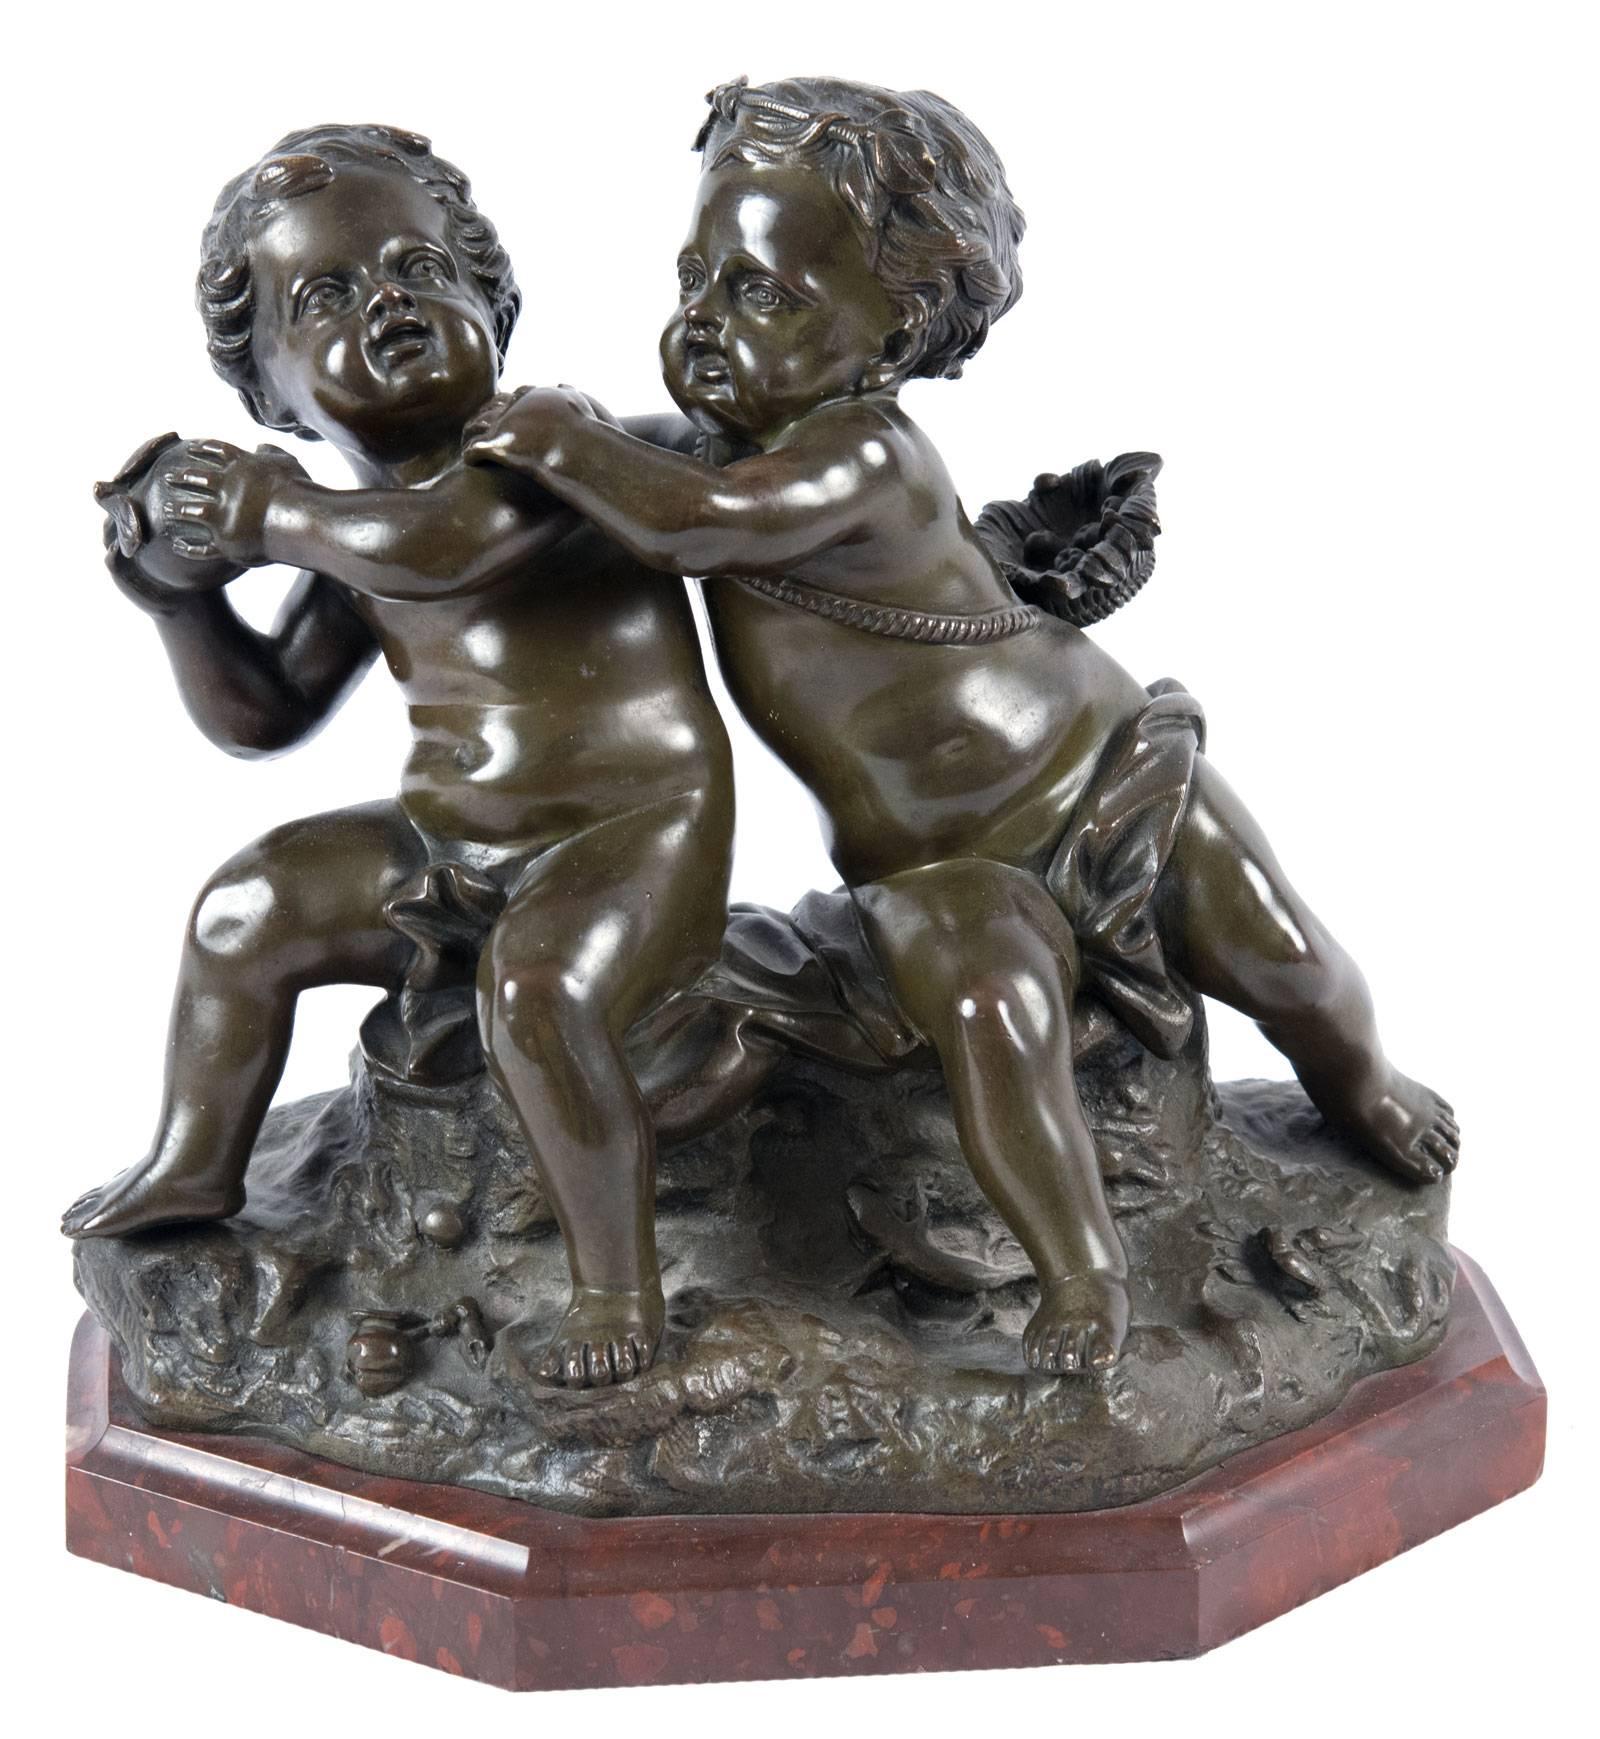 The two putti seated on a draped rockwork base in playful dispute over an apple; one with a basket of fruit at his waist. The grouping mounted on a shaped rouge griotte marble base.

A renowned 17th century sculptor, Jean Baptiste Pigalle